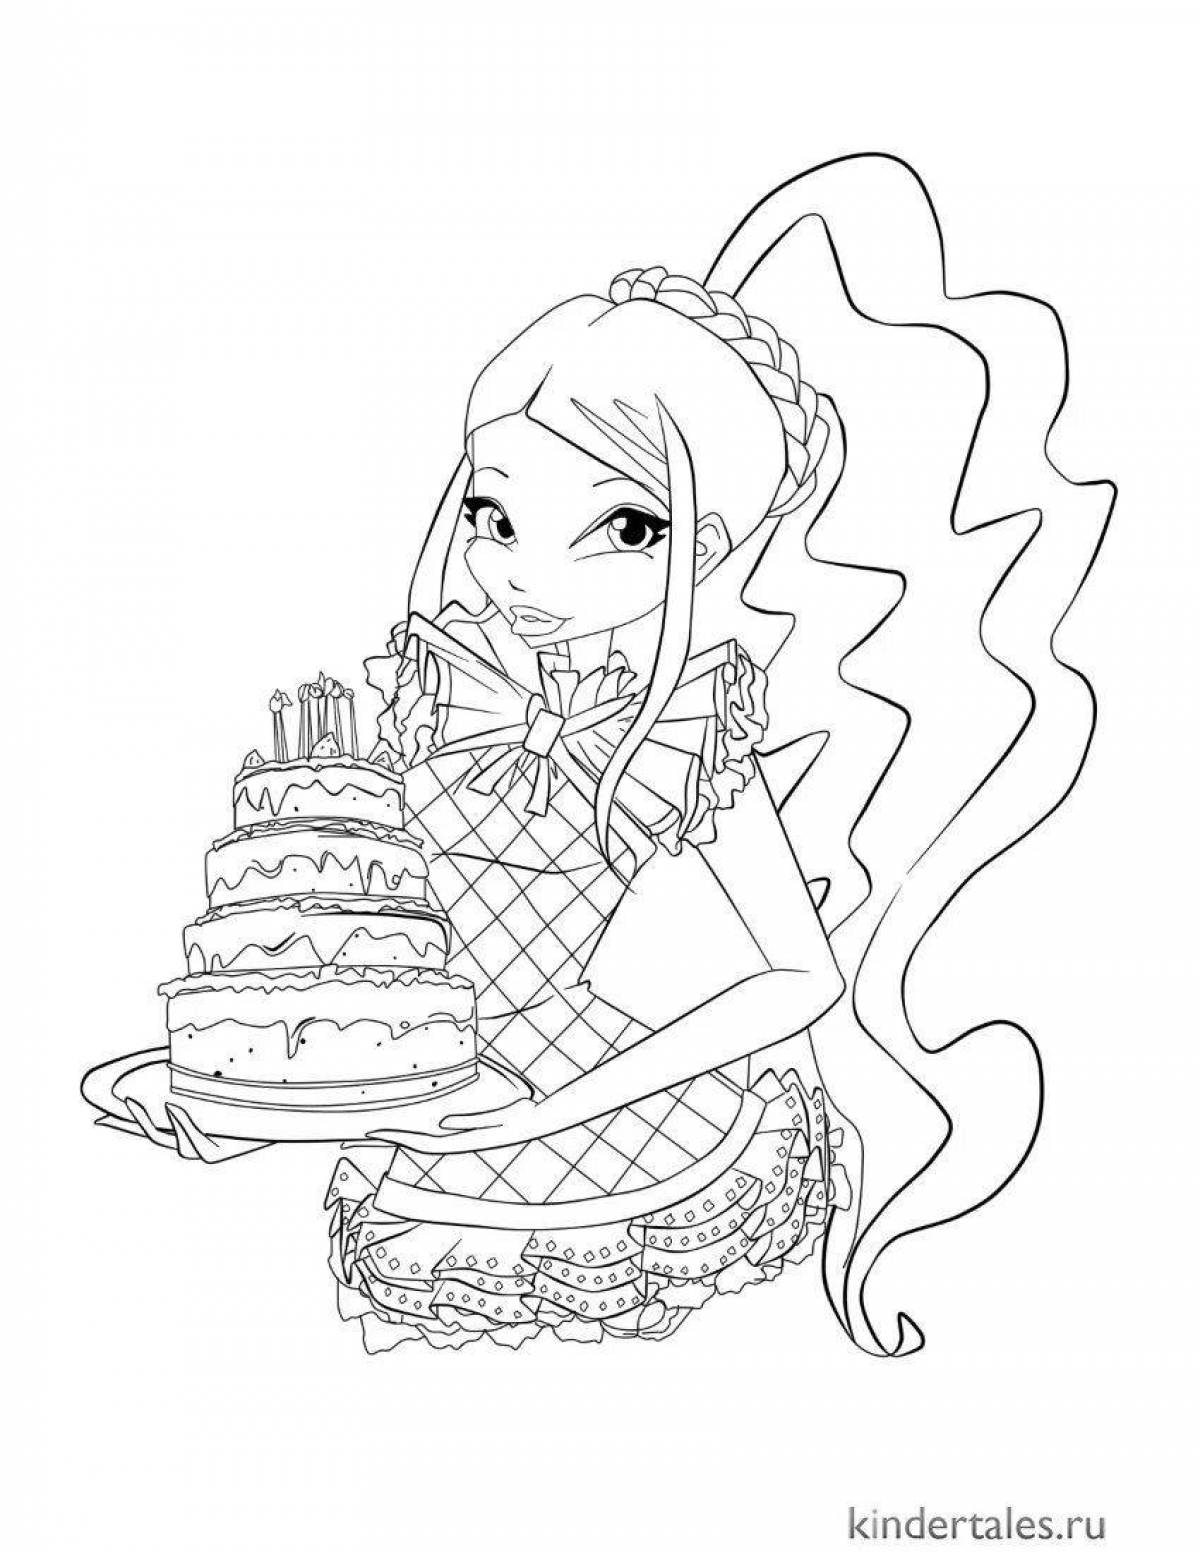 Amazing roxy coloring page